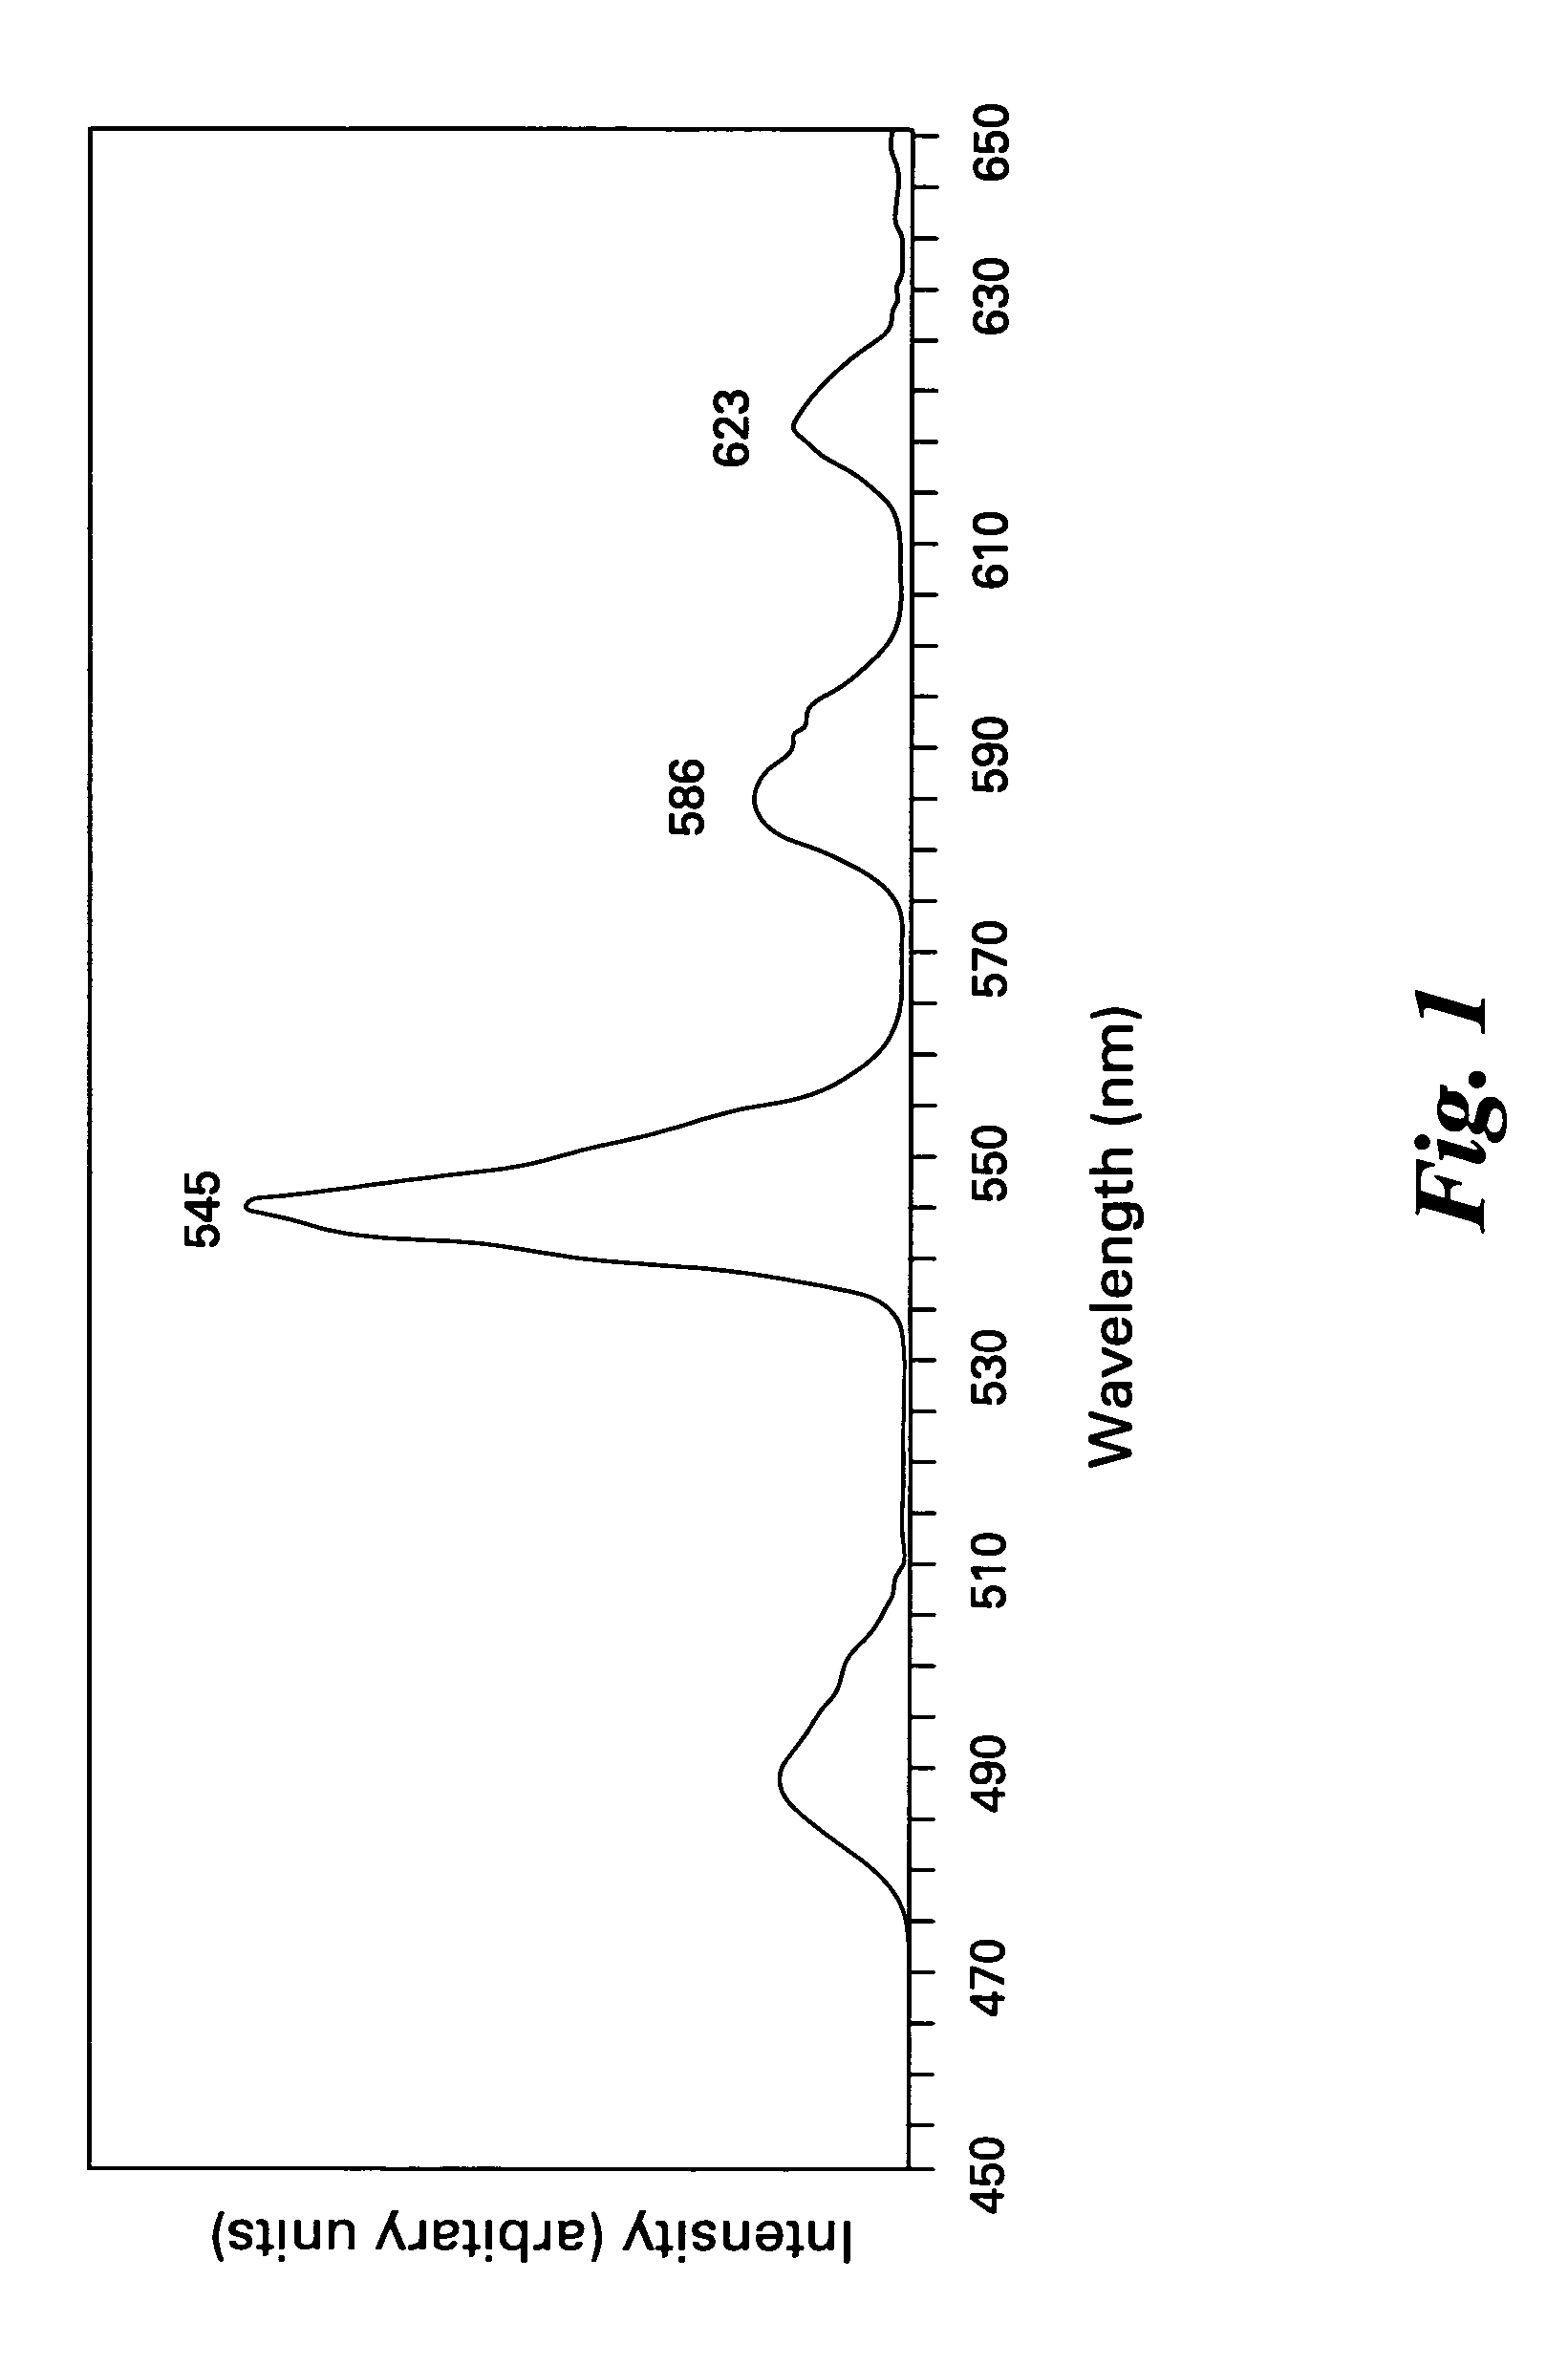 Phosphors containing borate of terbium, alkaline-earth, and Group-3 metals, and light sources incorporating the same